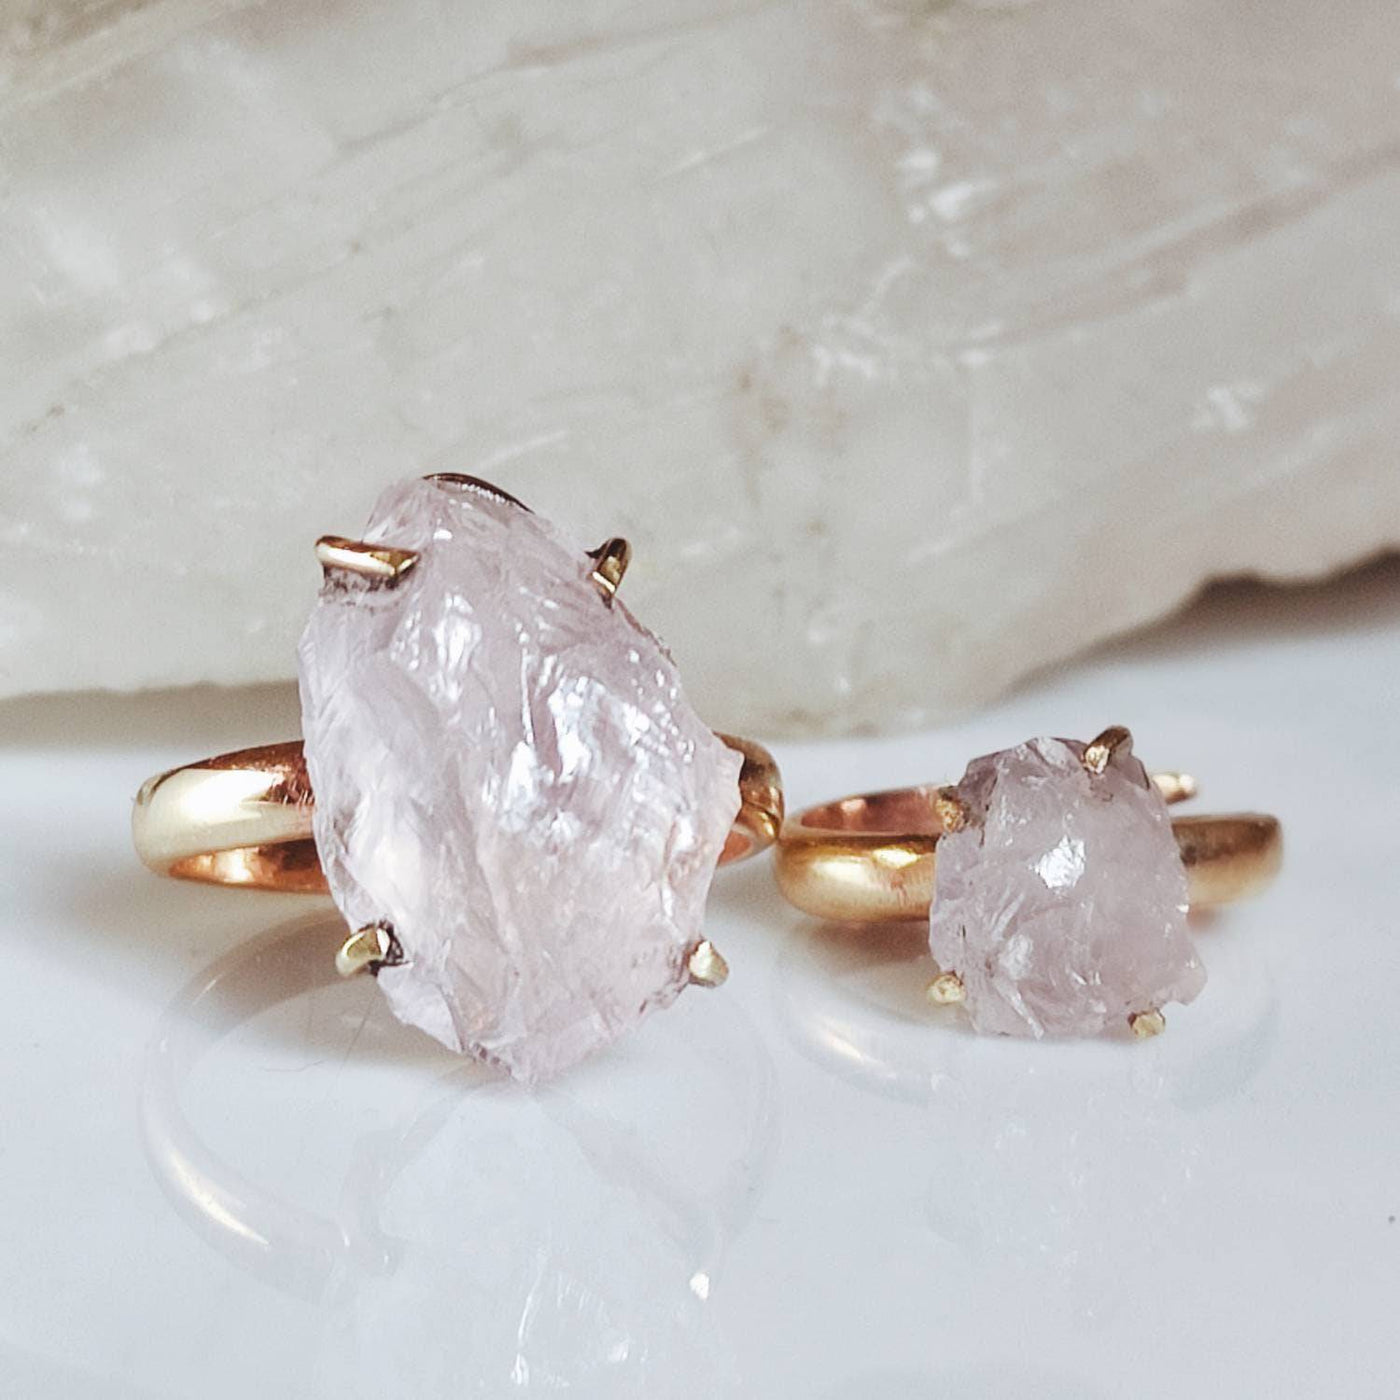 mommy-and-me-raw-crystal-rings.jpg